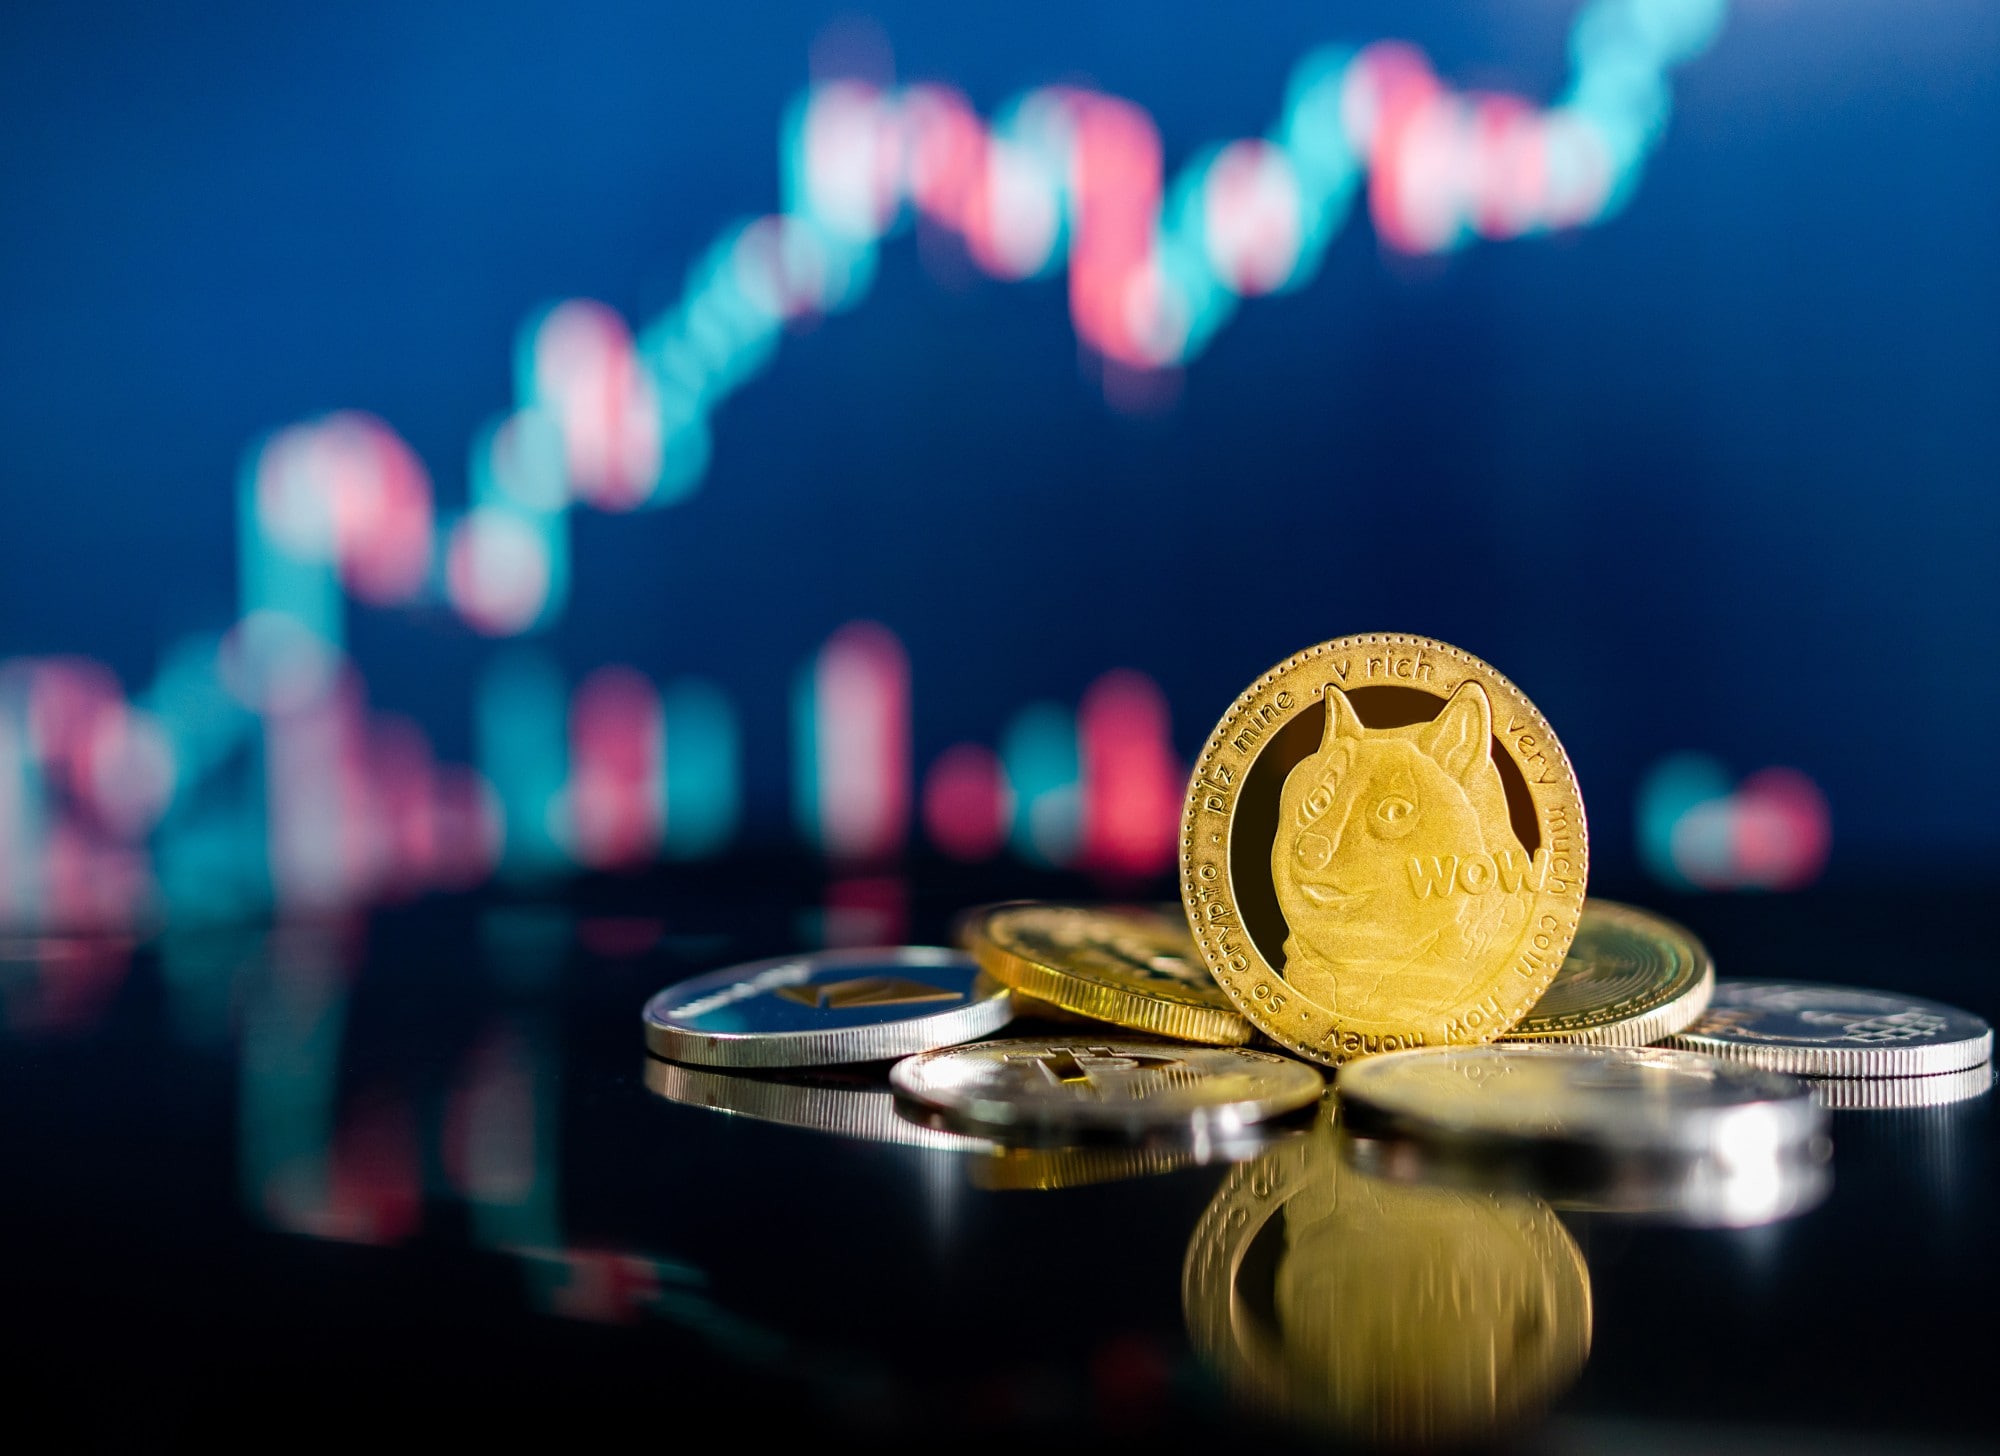  3. Shiba Inu:  Shiba Inu, Dogecoin’s spinoff, has surged over 2,000 percent in the four days (till May 11). While it is barely worth a fraction of a cent and it doesn’t have any practical value, the coin is surging, and that eventually translates into profits. The coin has a market cap of well over $5 billion, according to CoinMarketCap.